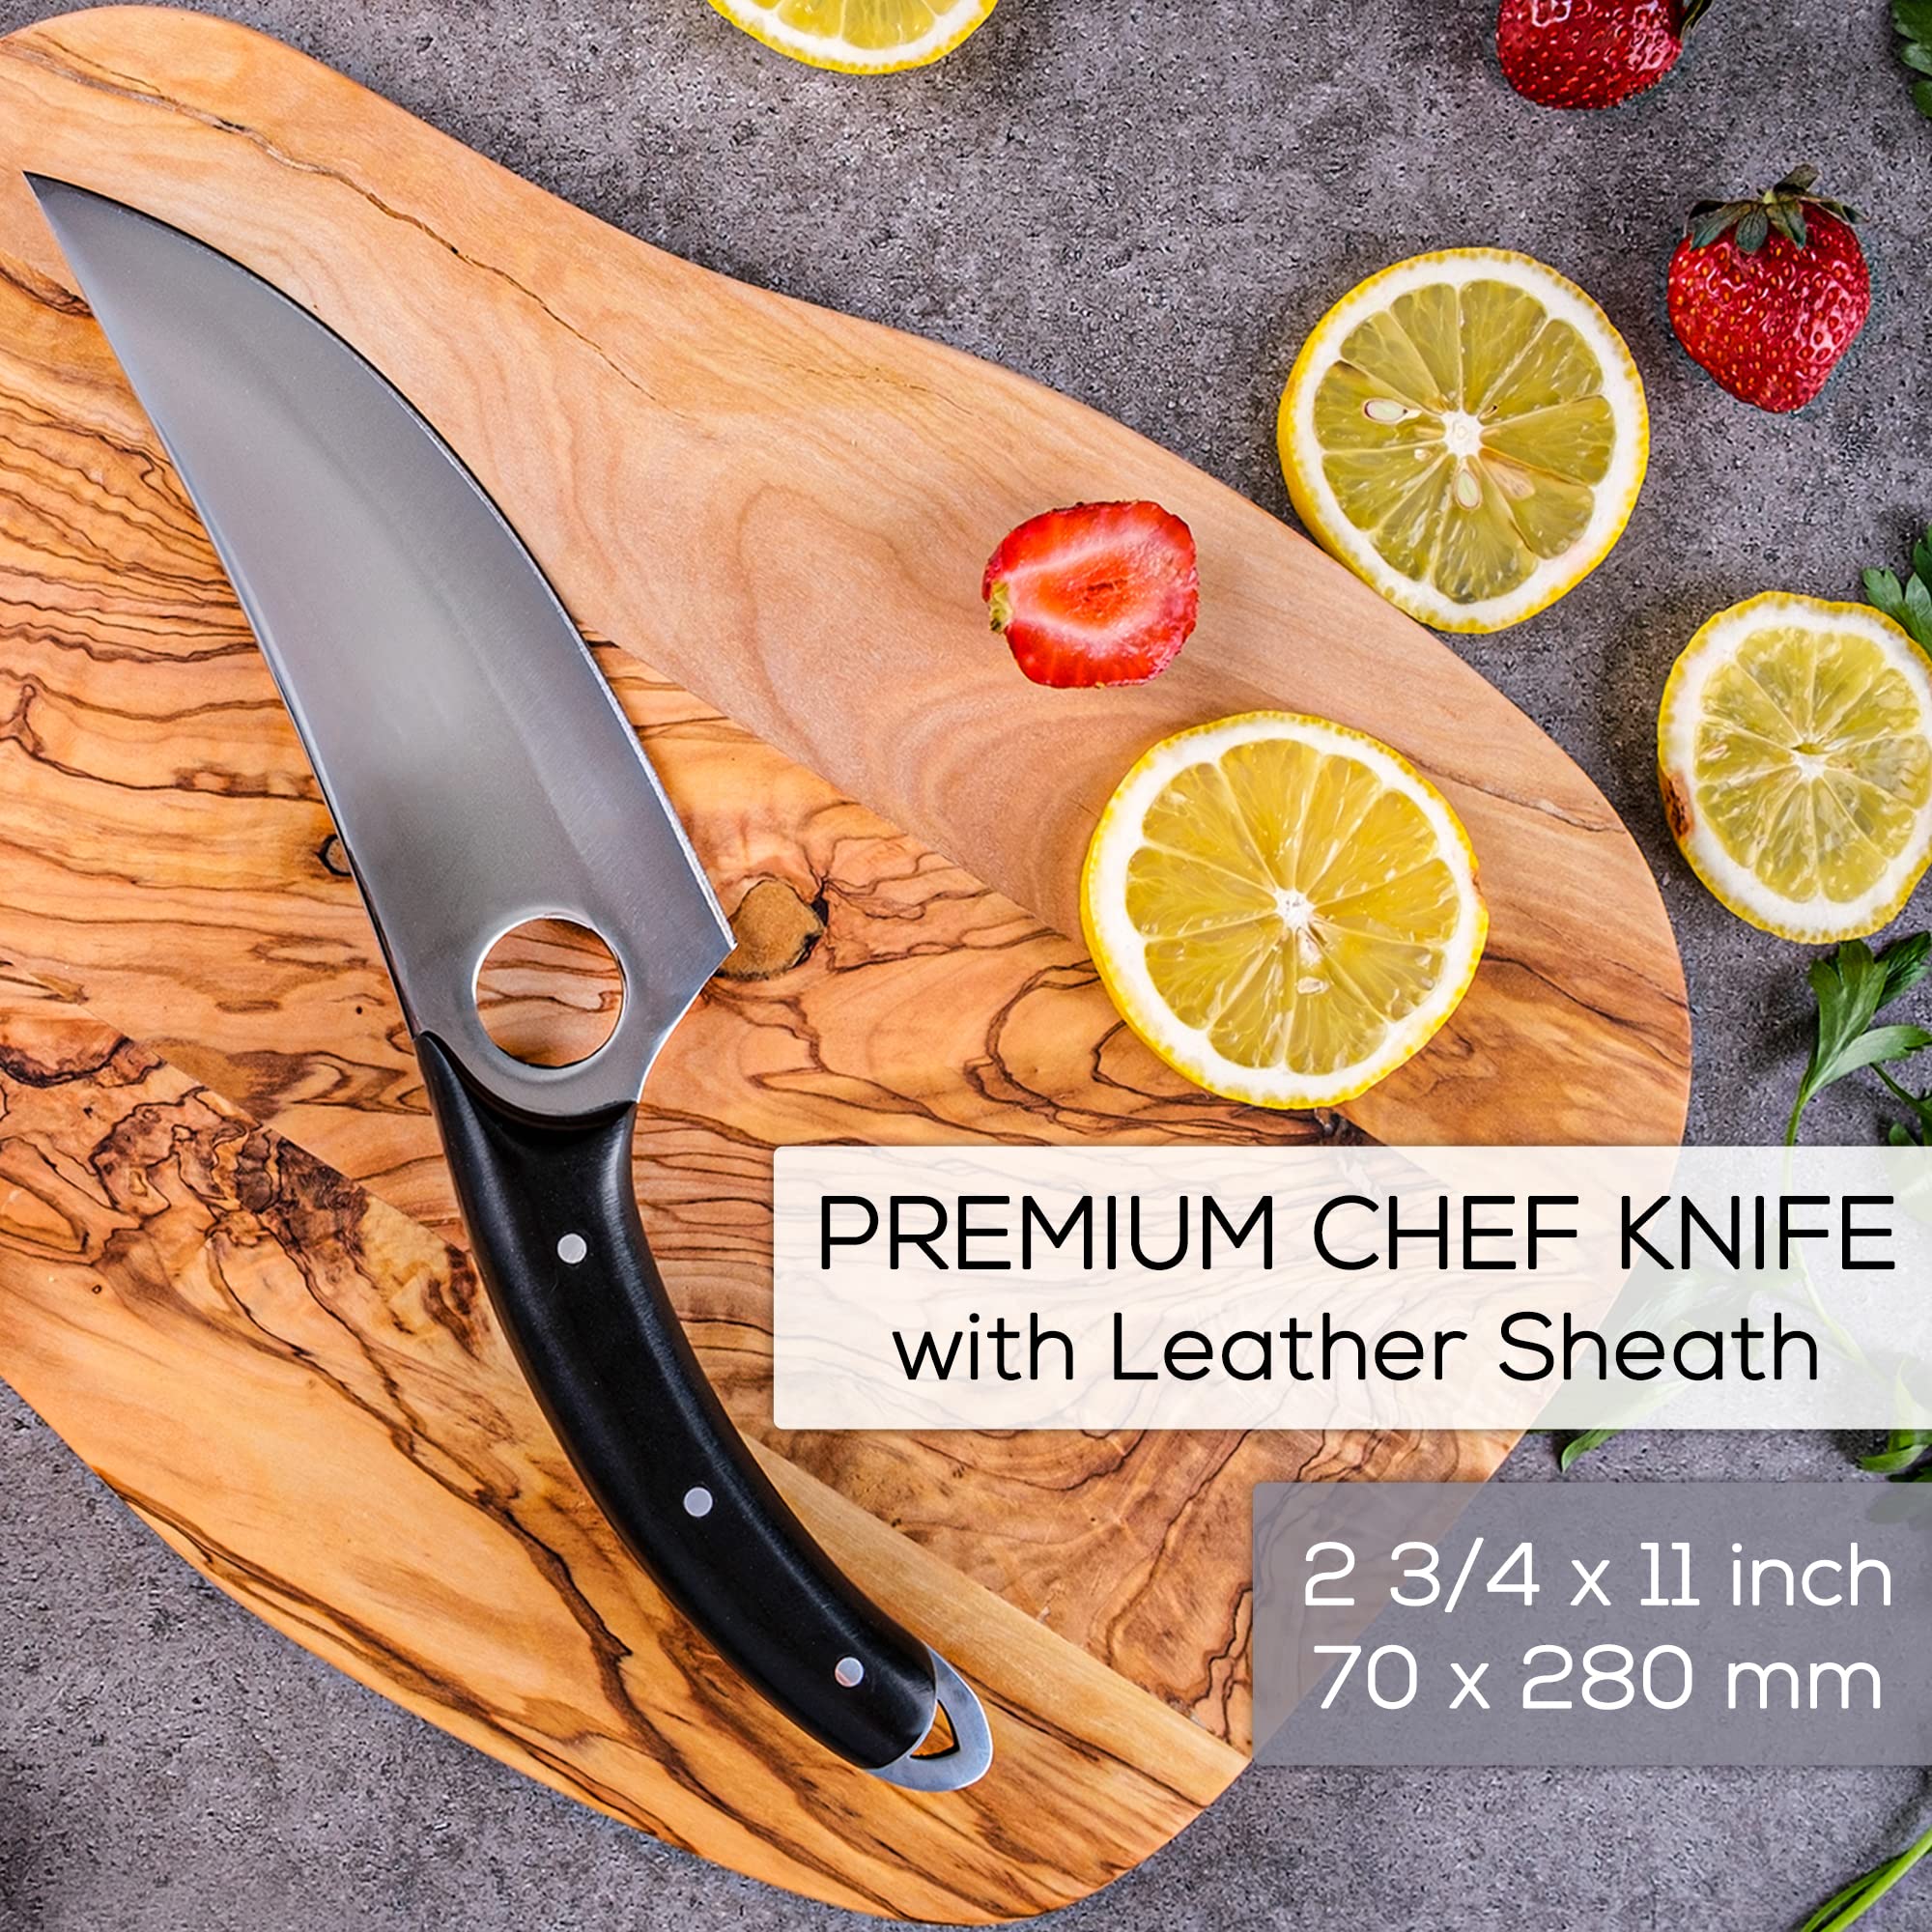 Crystalia Chefs Knife, Handmade Butcher Cleaver Knife for Meat Cutting, Hand Forged Boning Knife with Sheath, Caveman Style Viking Knives for Kitchen, BBQ, Camping, or Outdoor, 11 inches